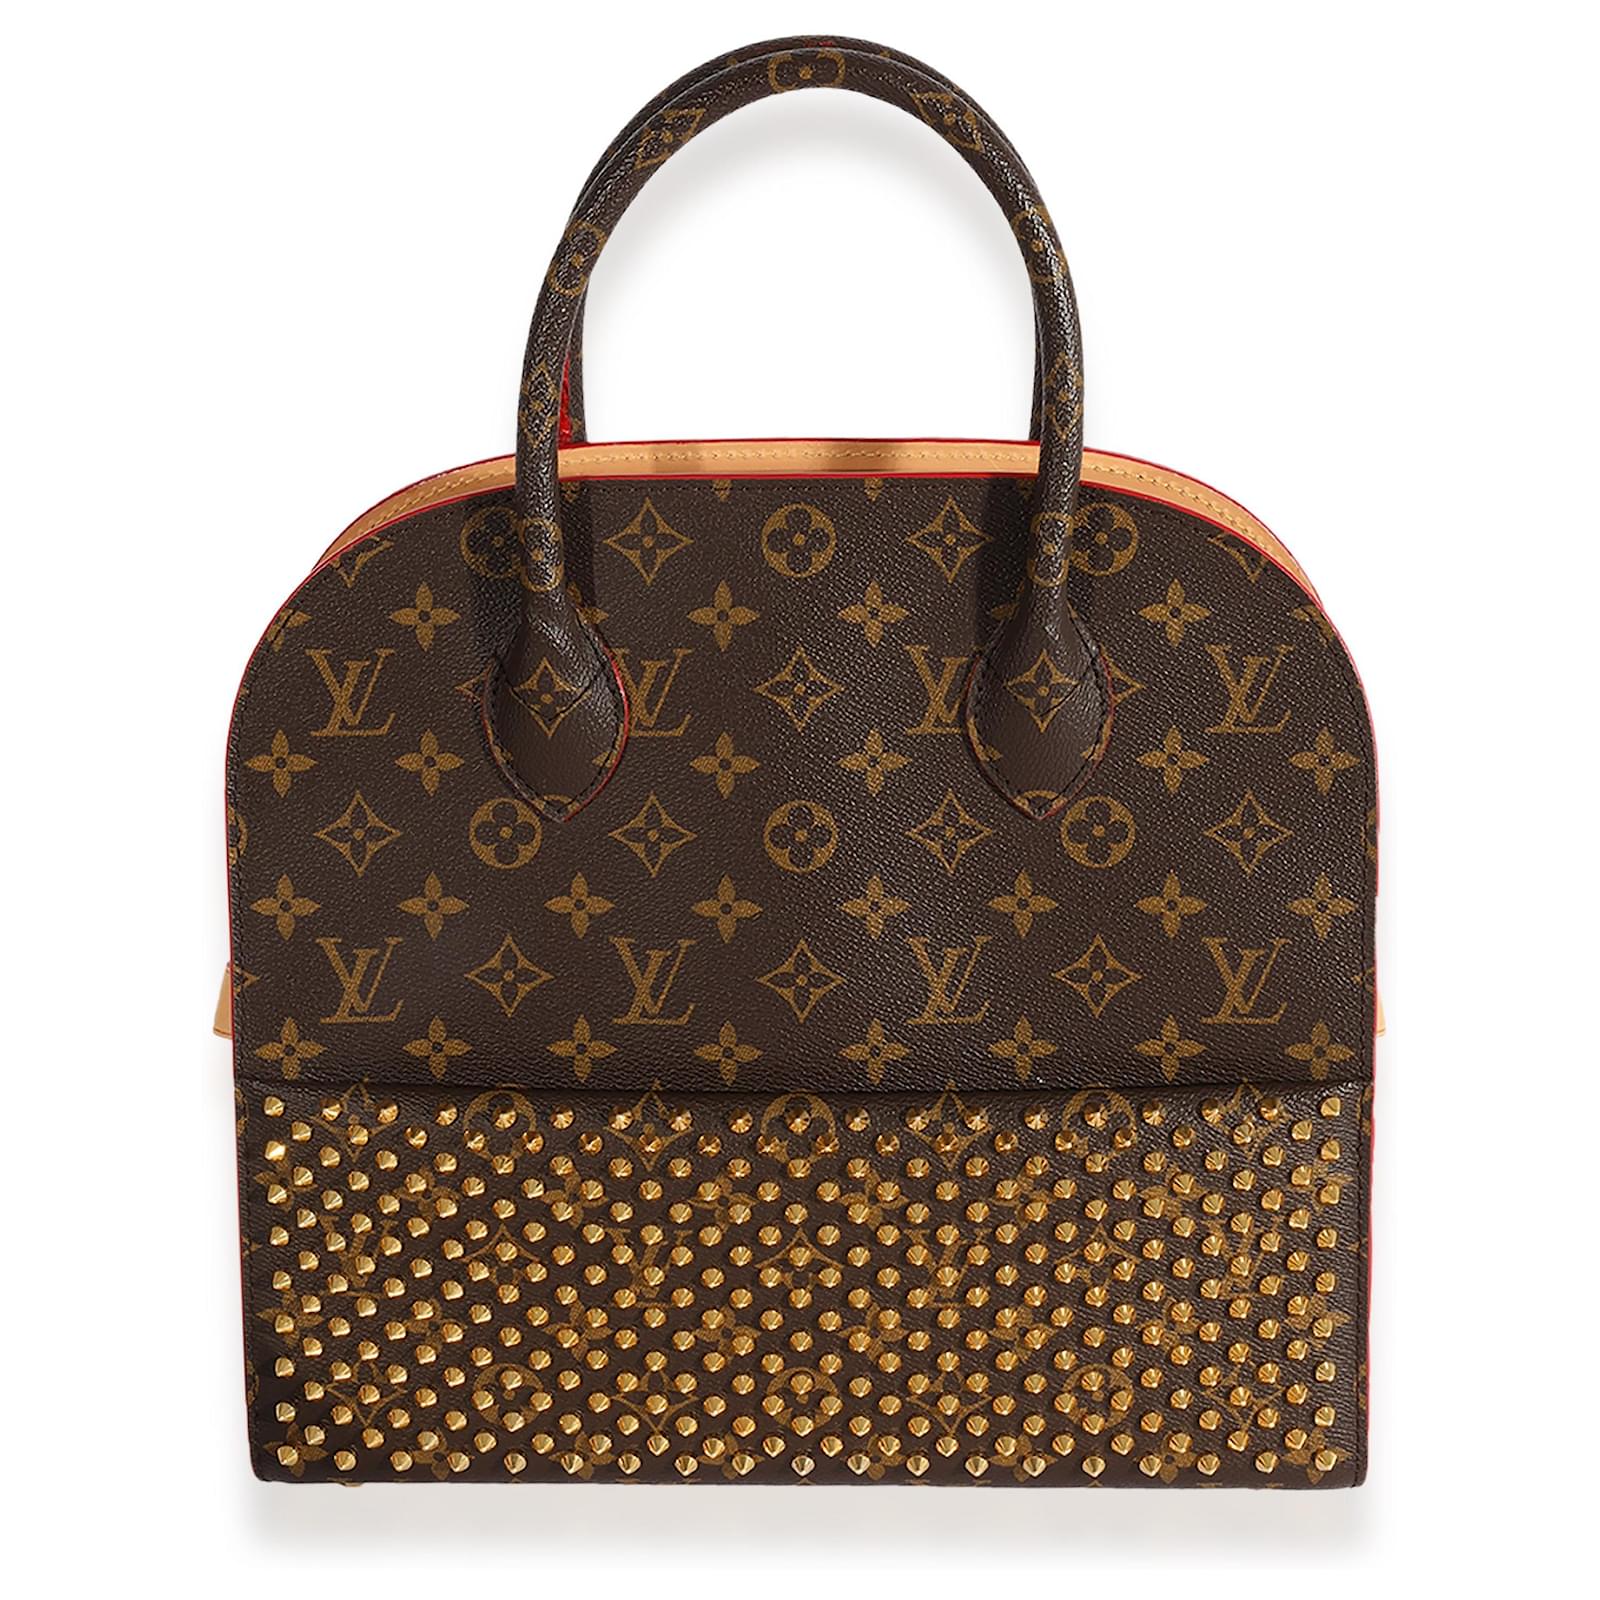 Celebrate Monogram' with Louis Vuitton and 6 Iconoclasts